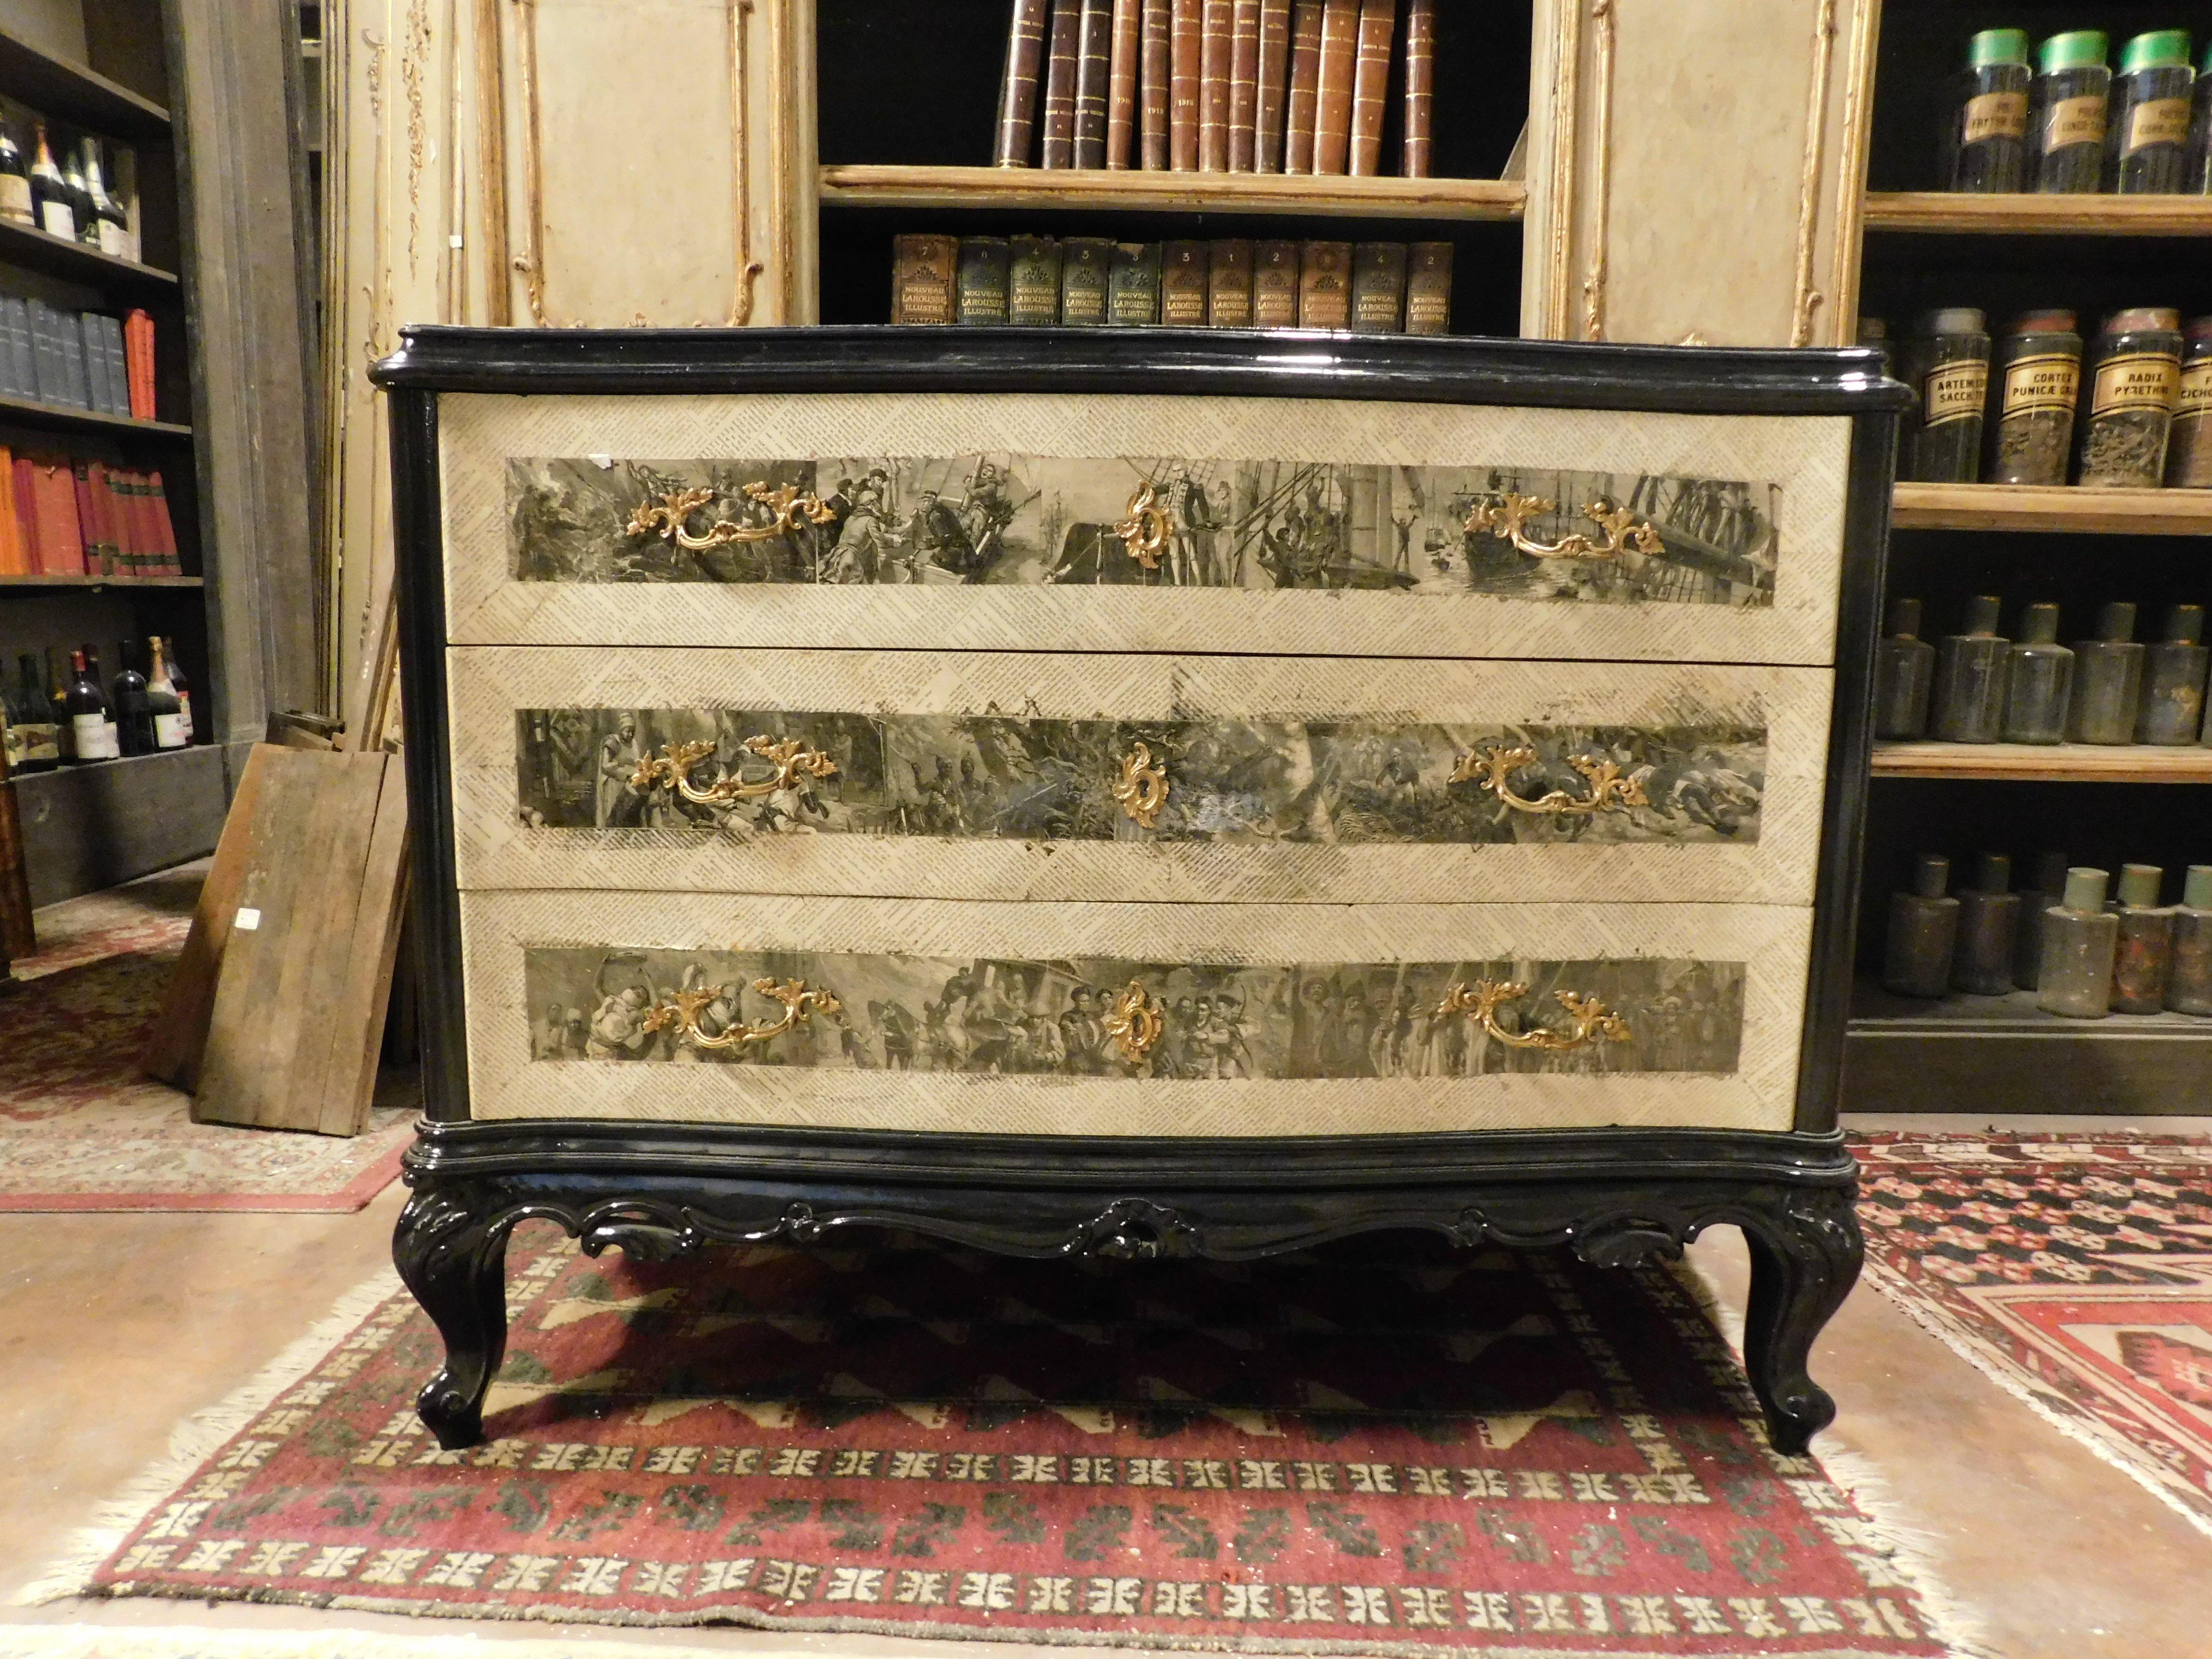 Vintage dresser in black ebonized wood, covered in French newspaper paper and prints depicting historical hunting scenes, gilded bronze applications and handles, 3 wavy drawers, built and decorated in the 20th century in France, maximum size cm w